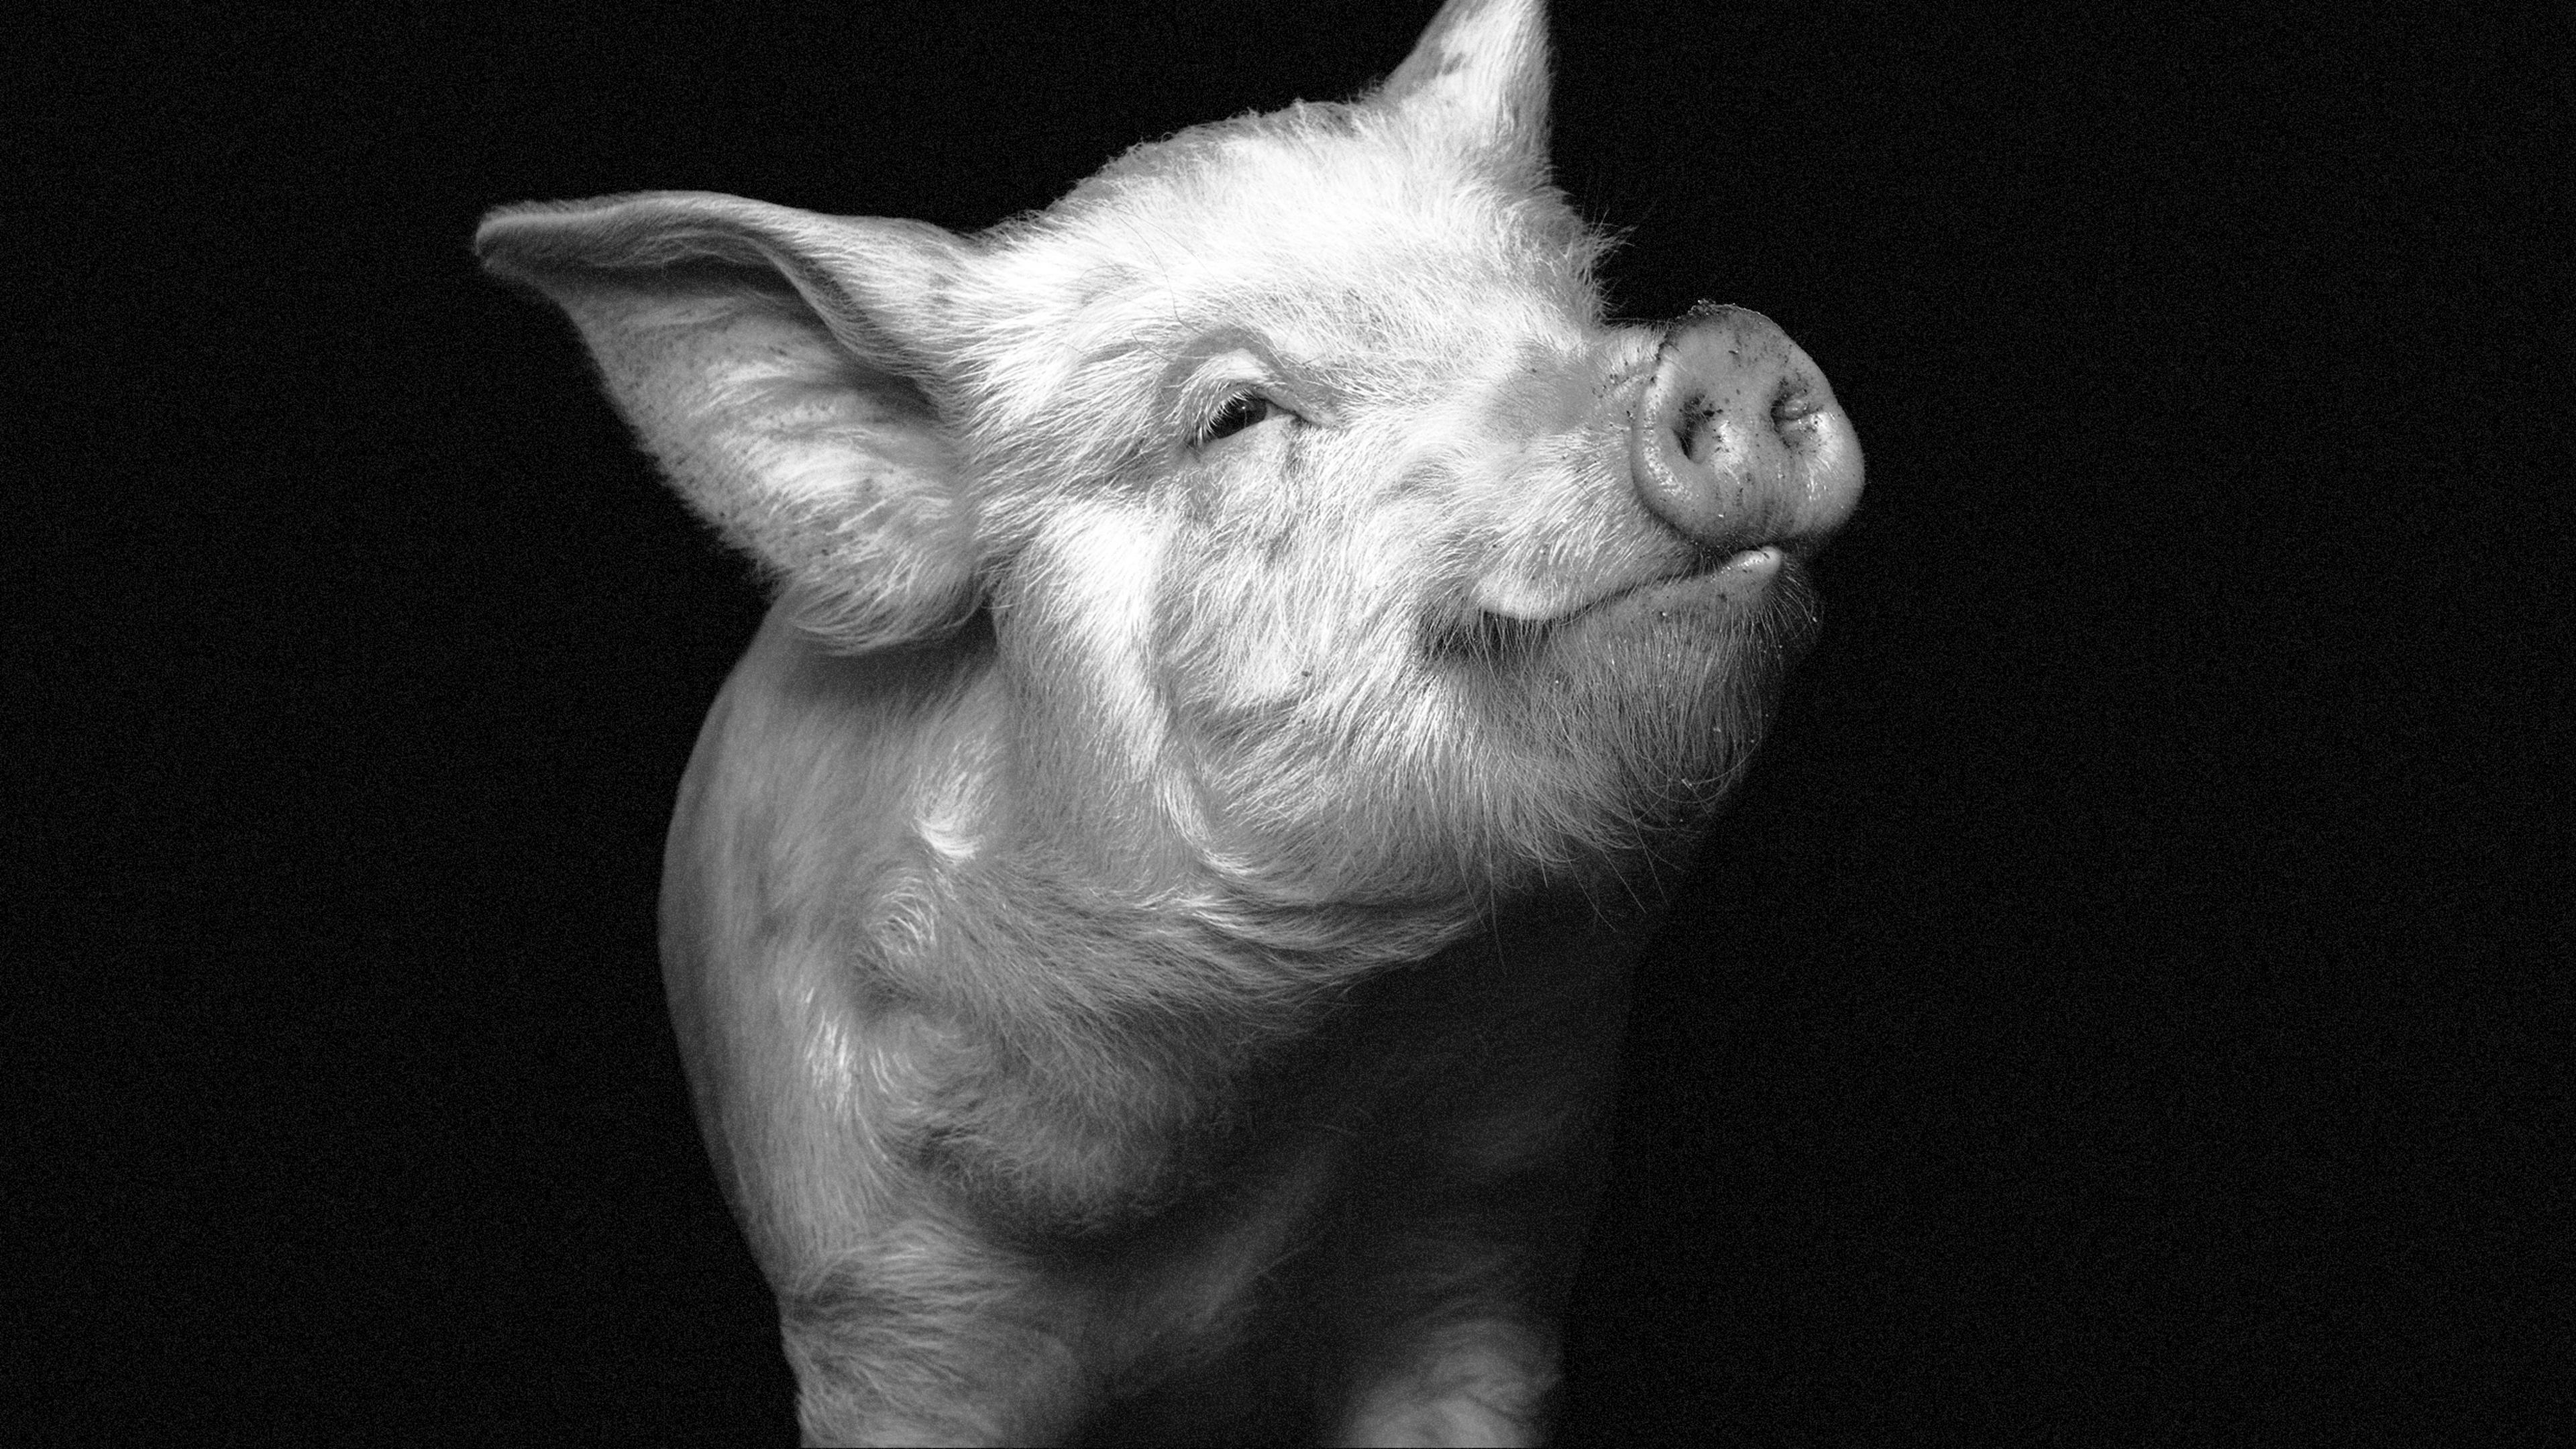 This macabre pig brain study tells us that “death” isn’t simply black and white